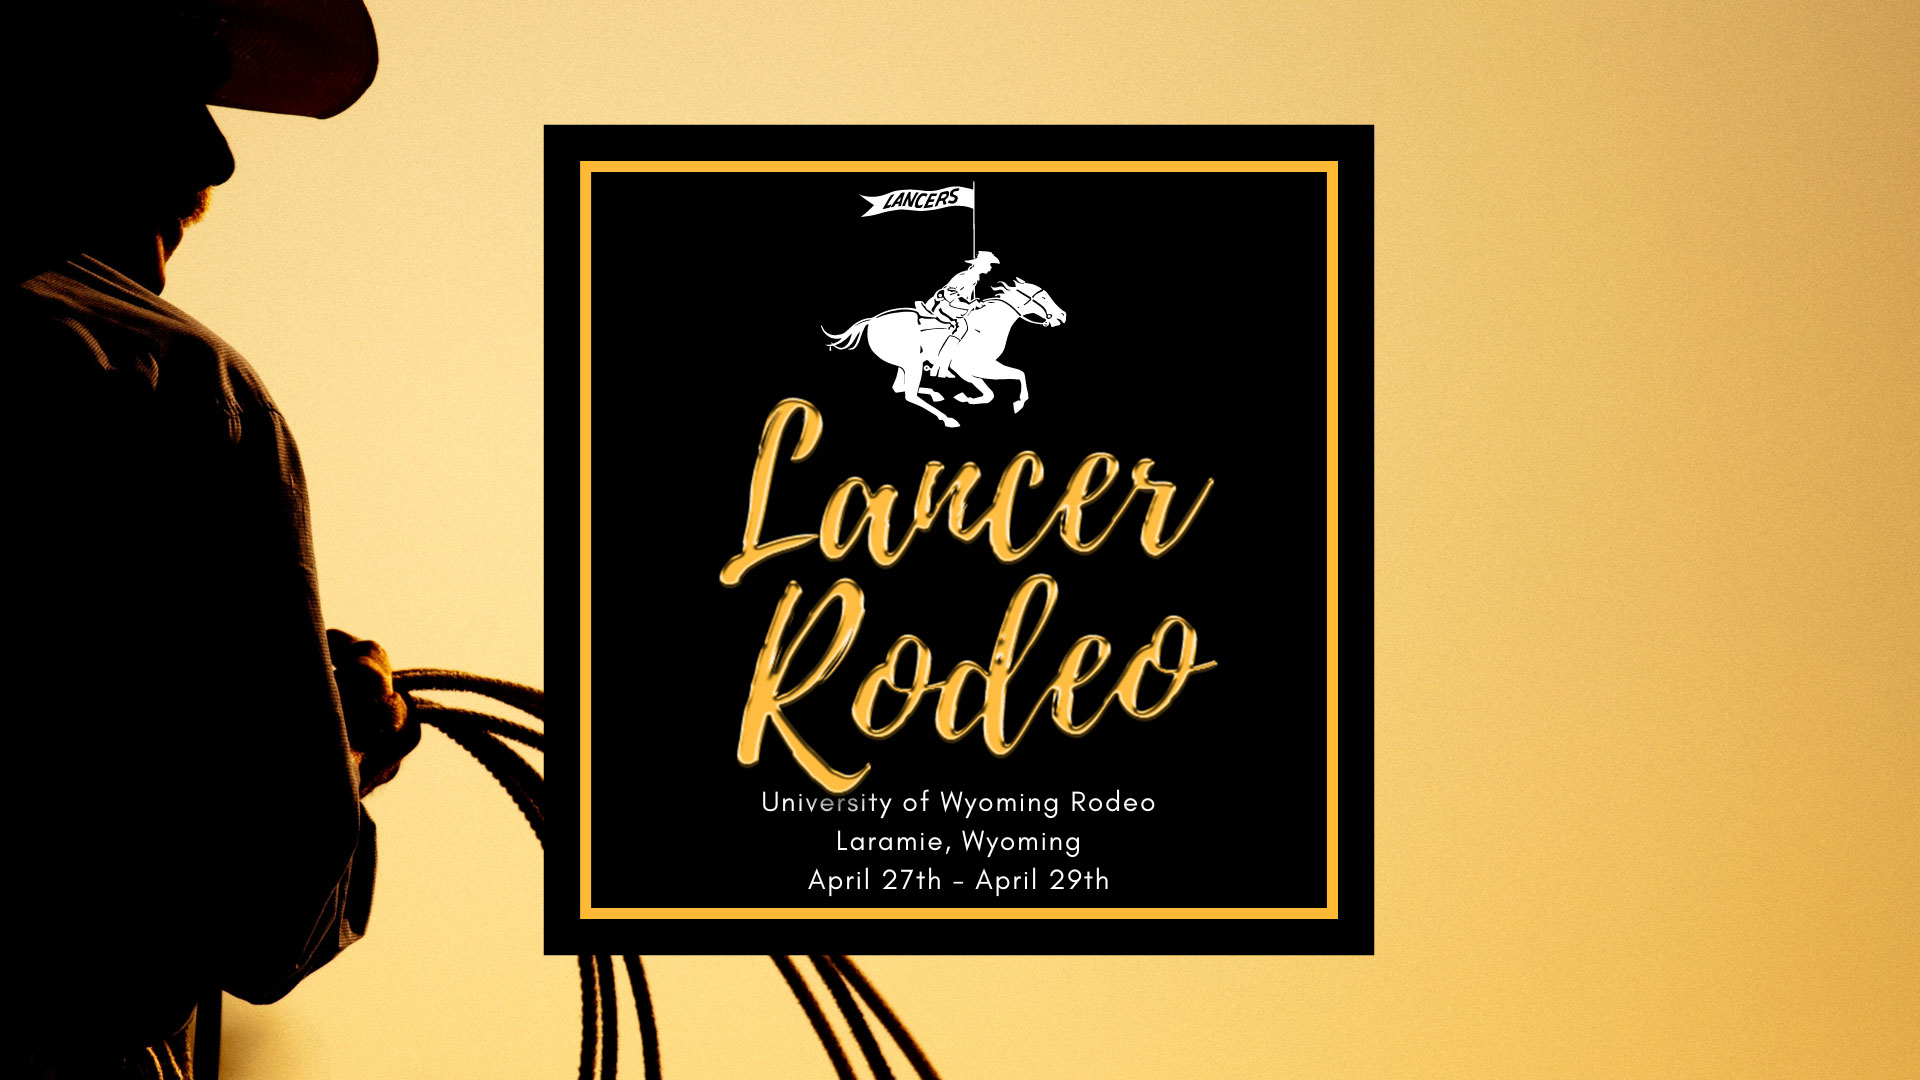 Eastern Wyoming College - Lancer Rodeo at University of Wyoming - April 27th - April 29th